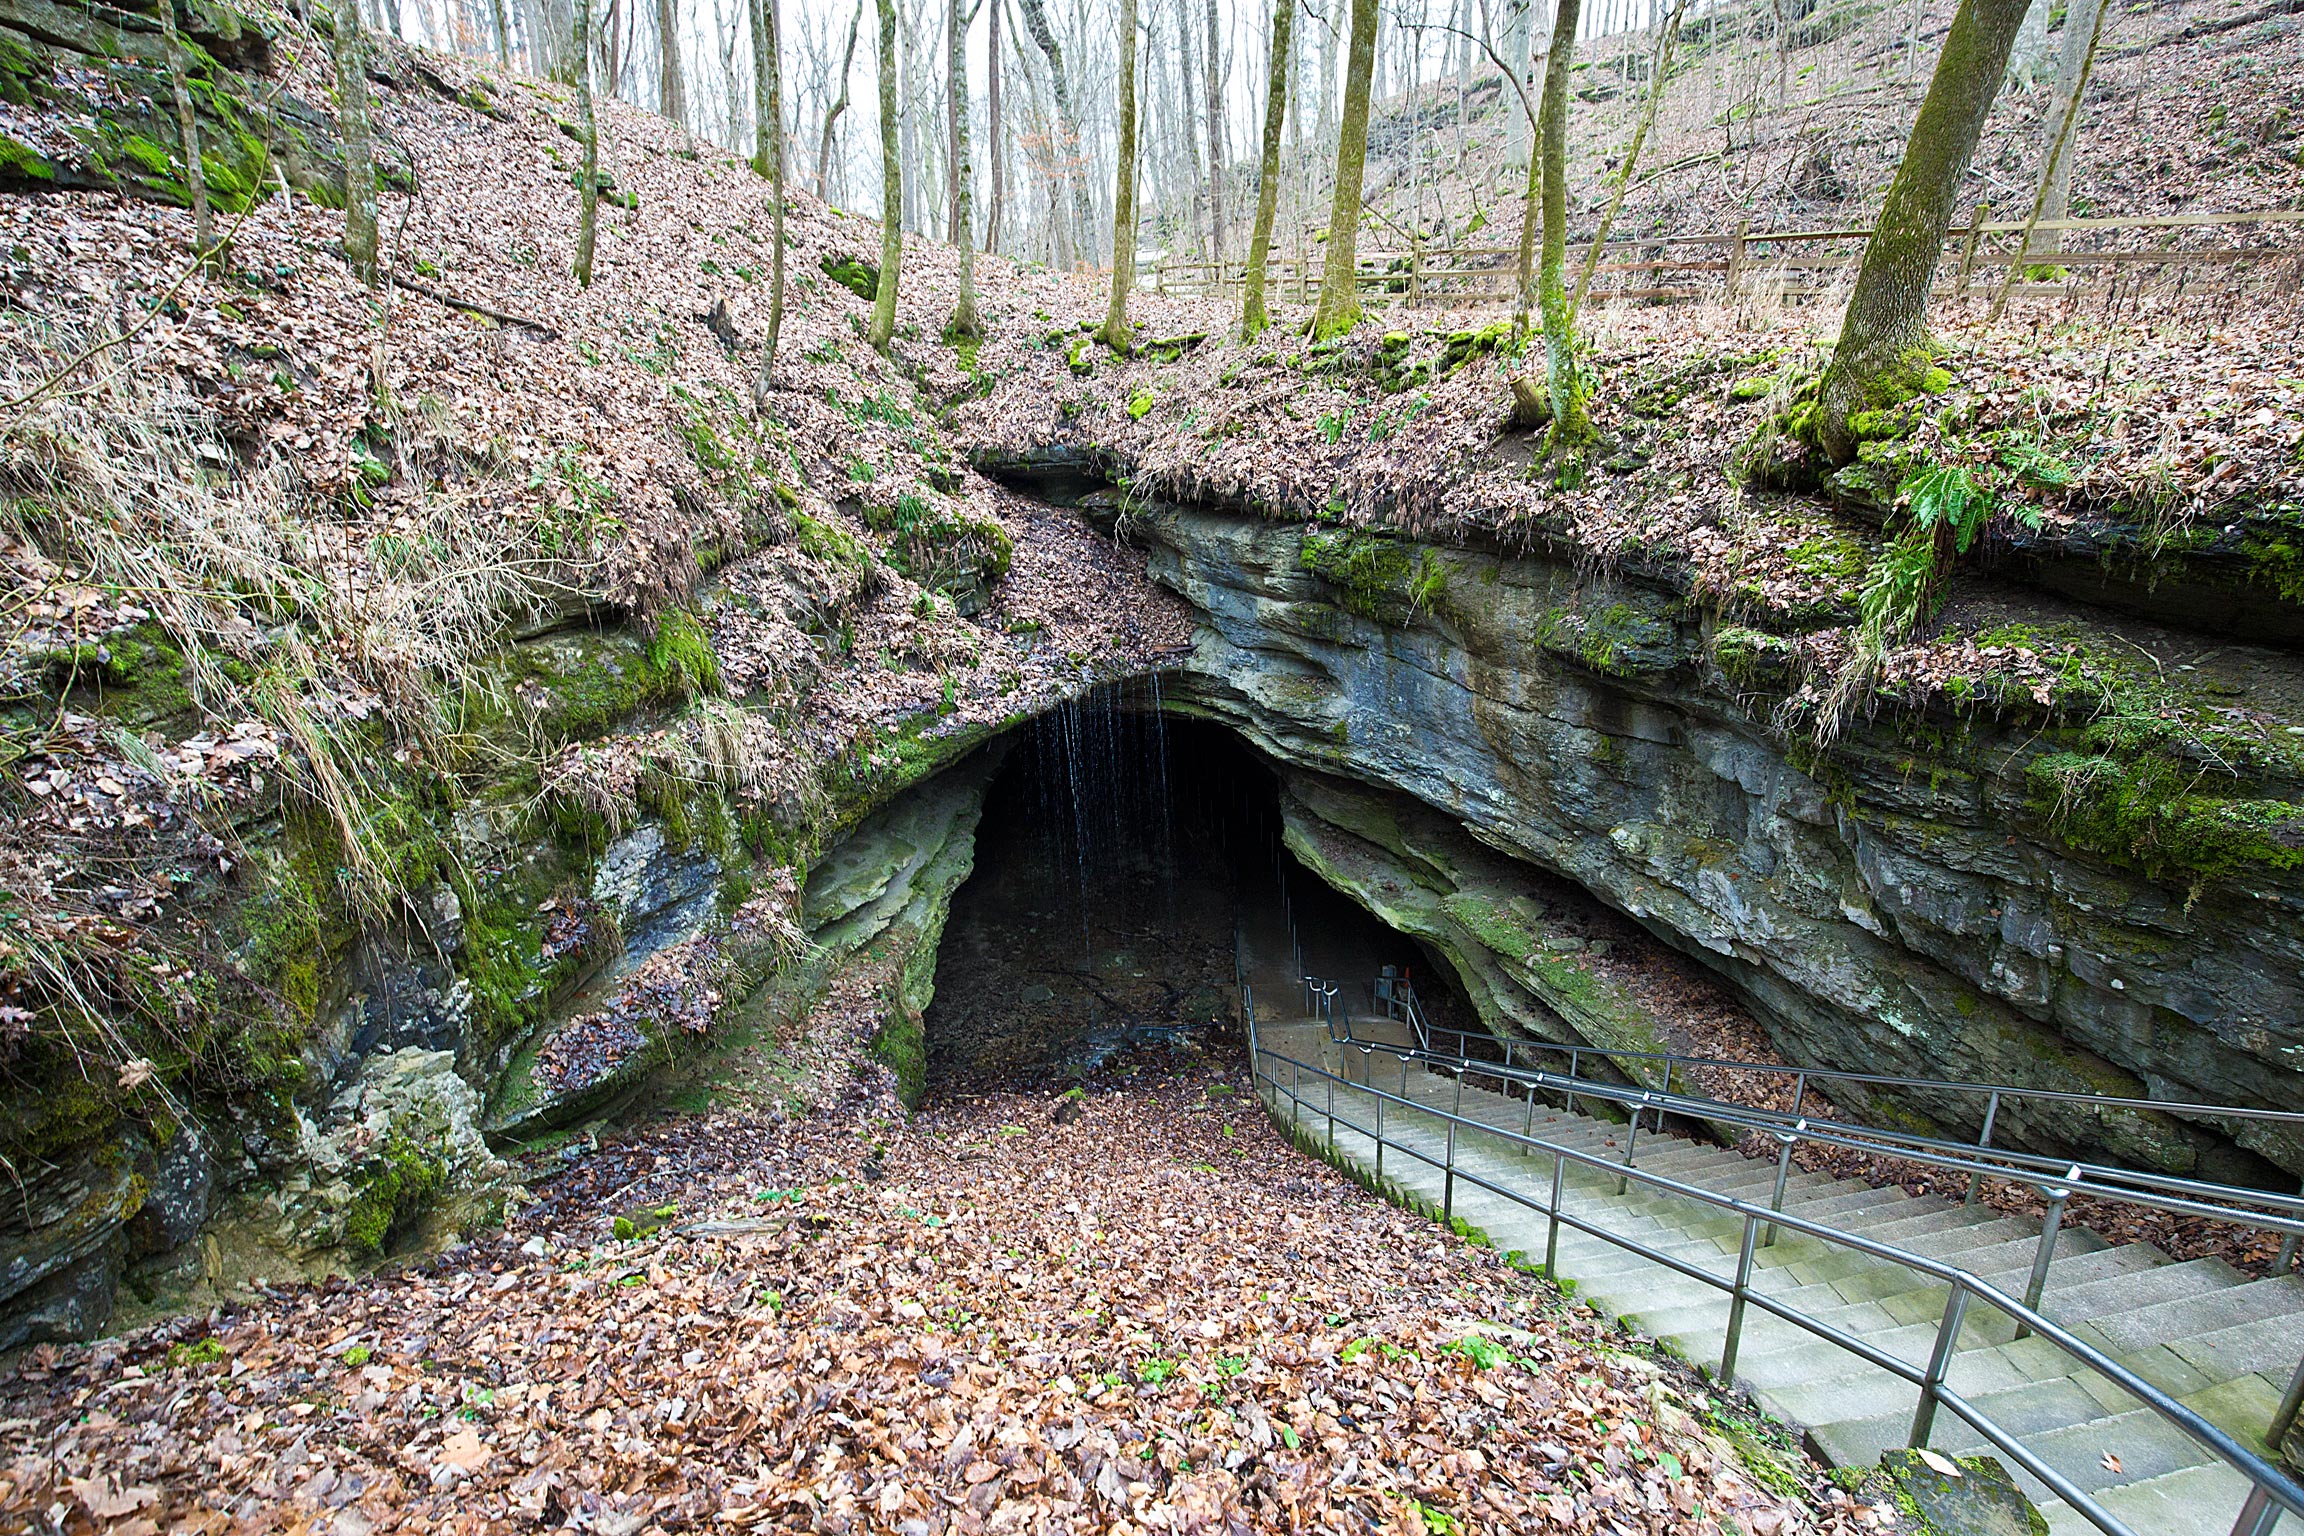 A Natural entrance to Mammoth Cave